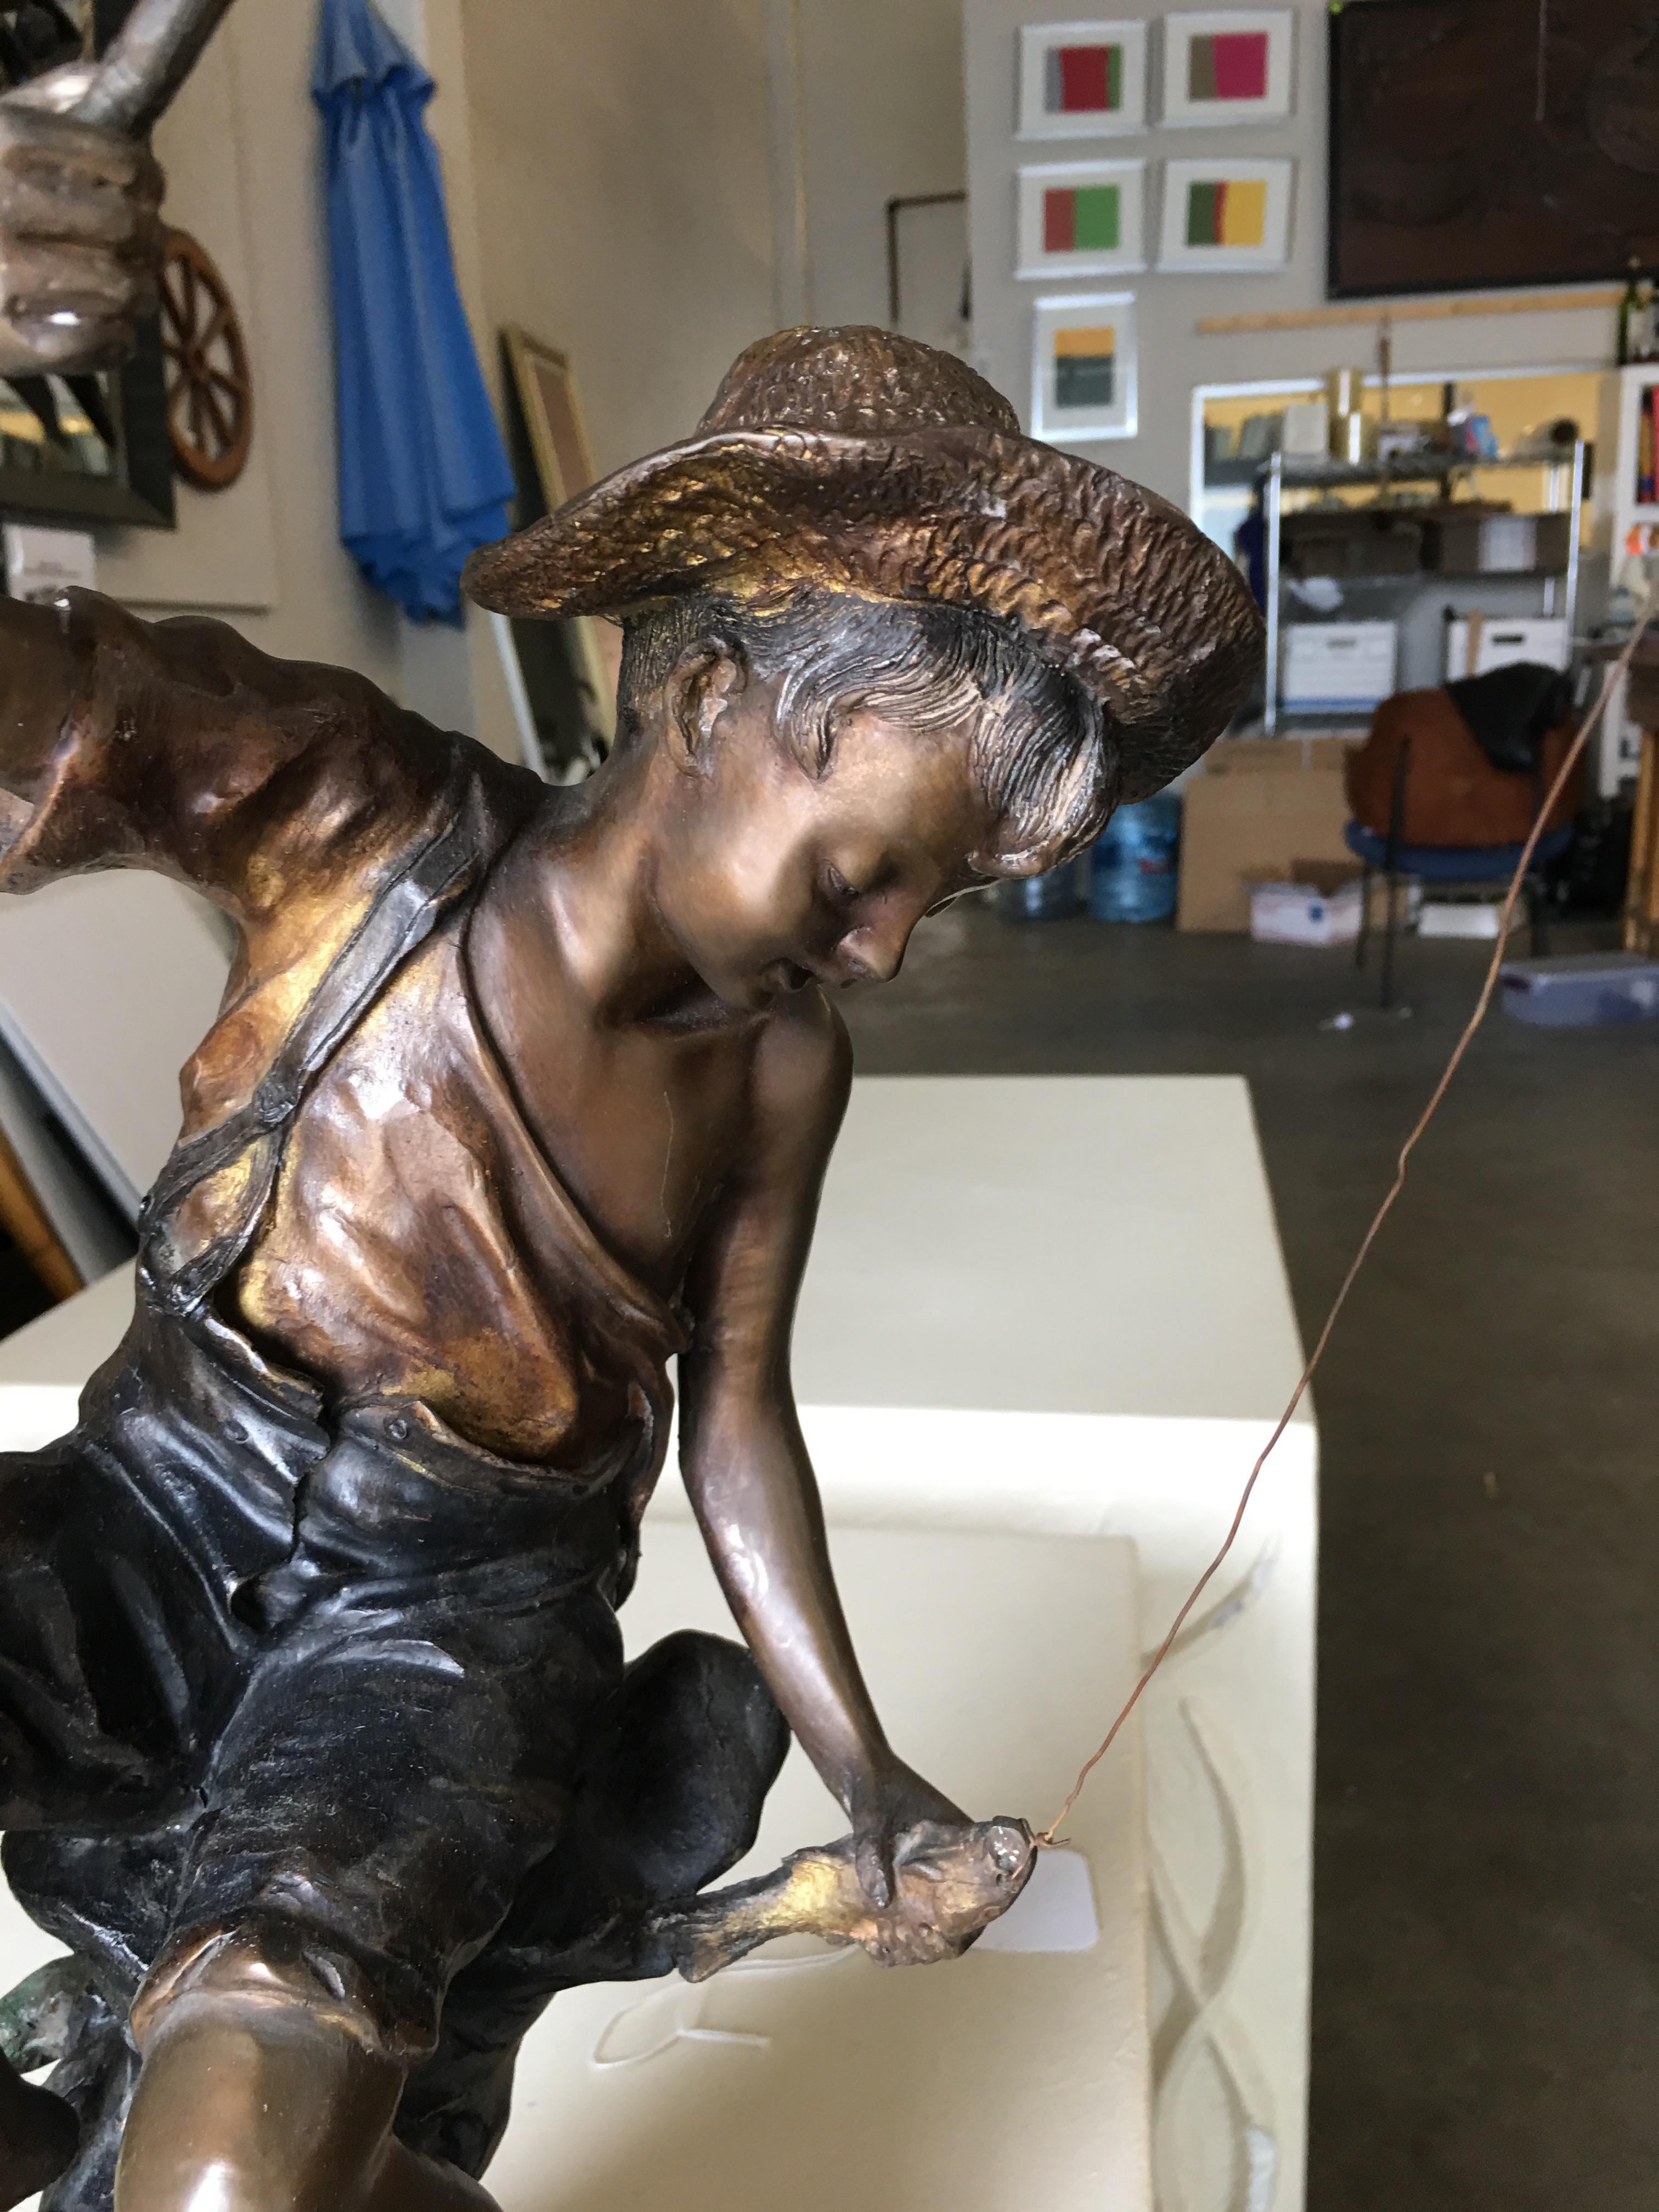 A young fisherman smiles down at his catch in this charming bronze figure by the famed Goldscheider of Vienna. This endearing piece is quintessential Goldscheider, epitomizing both the aesthetic appeal and naturalistic design of the Art Nouveau